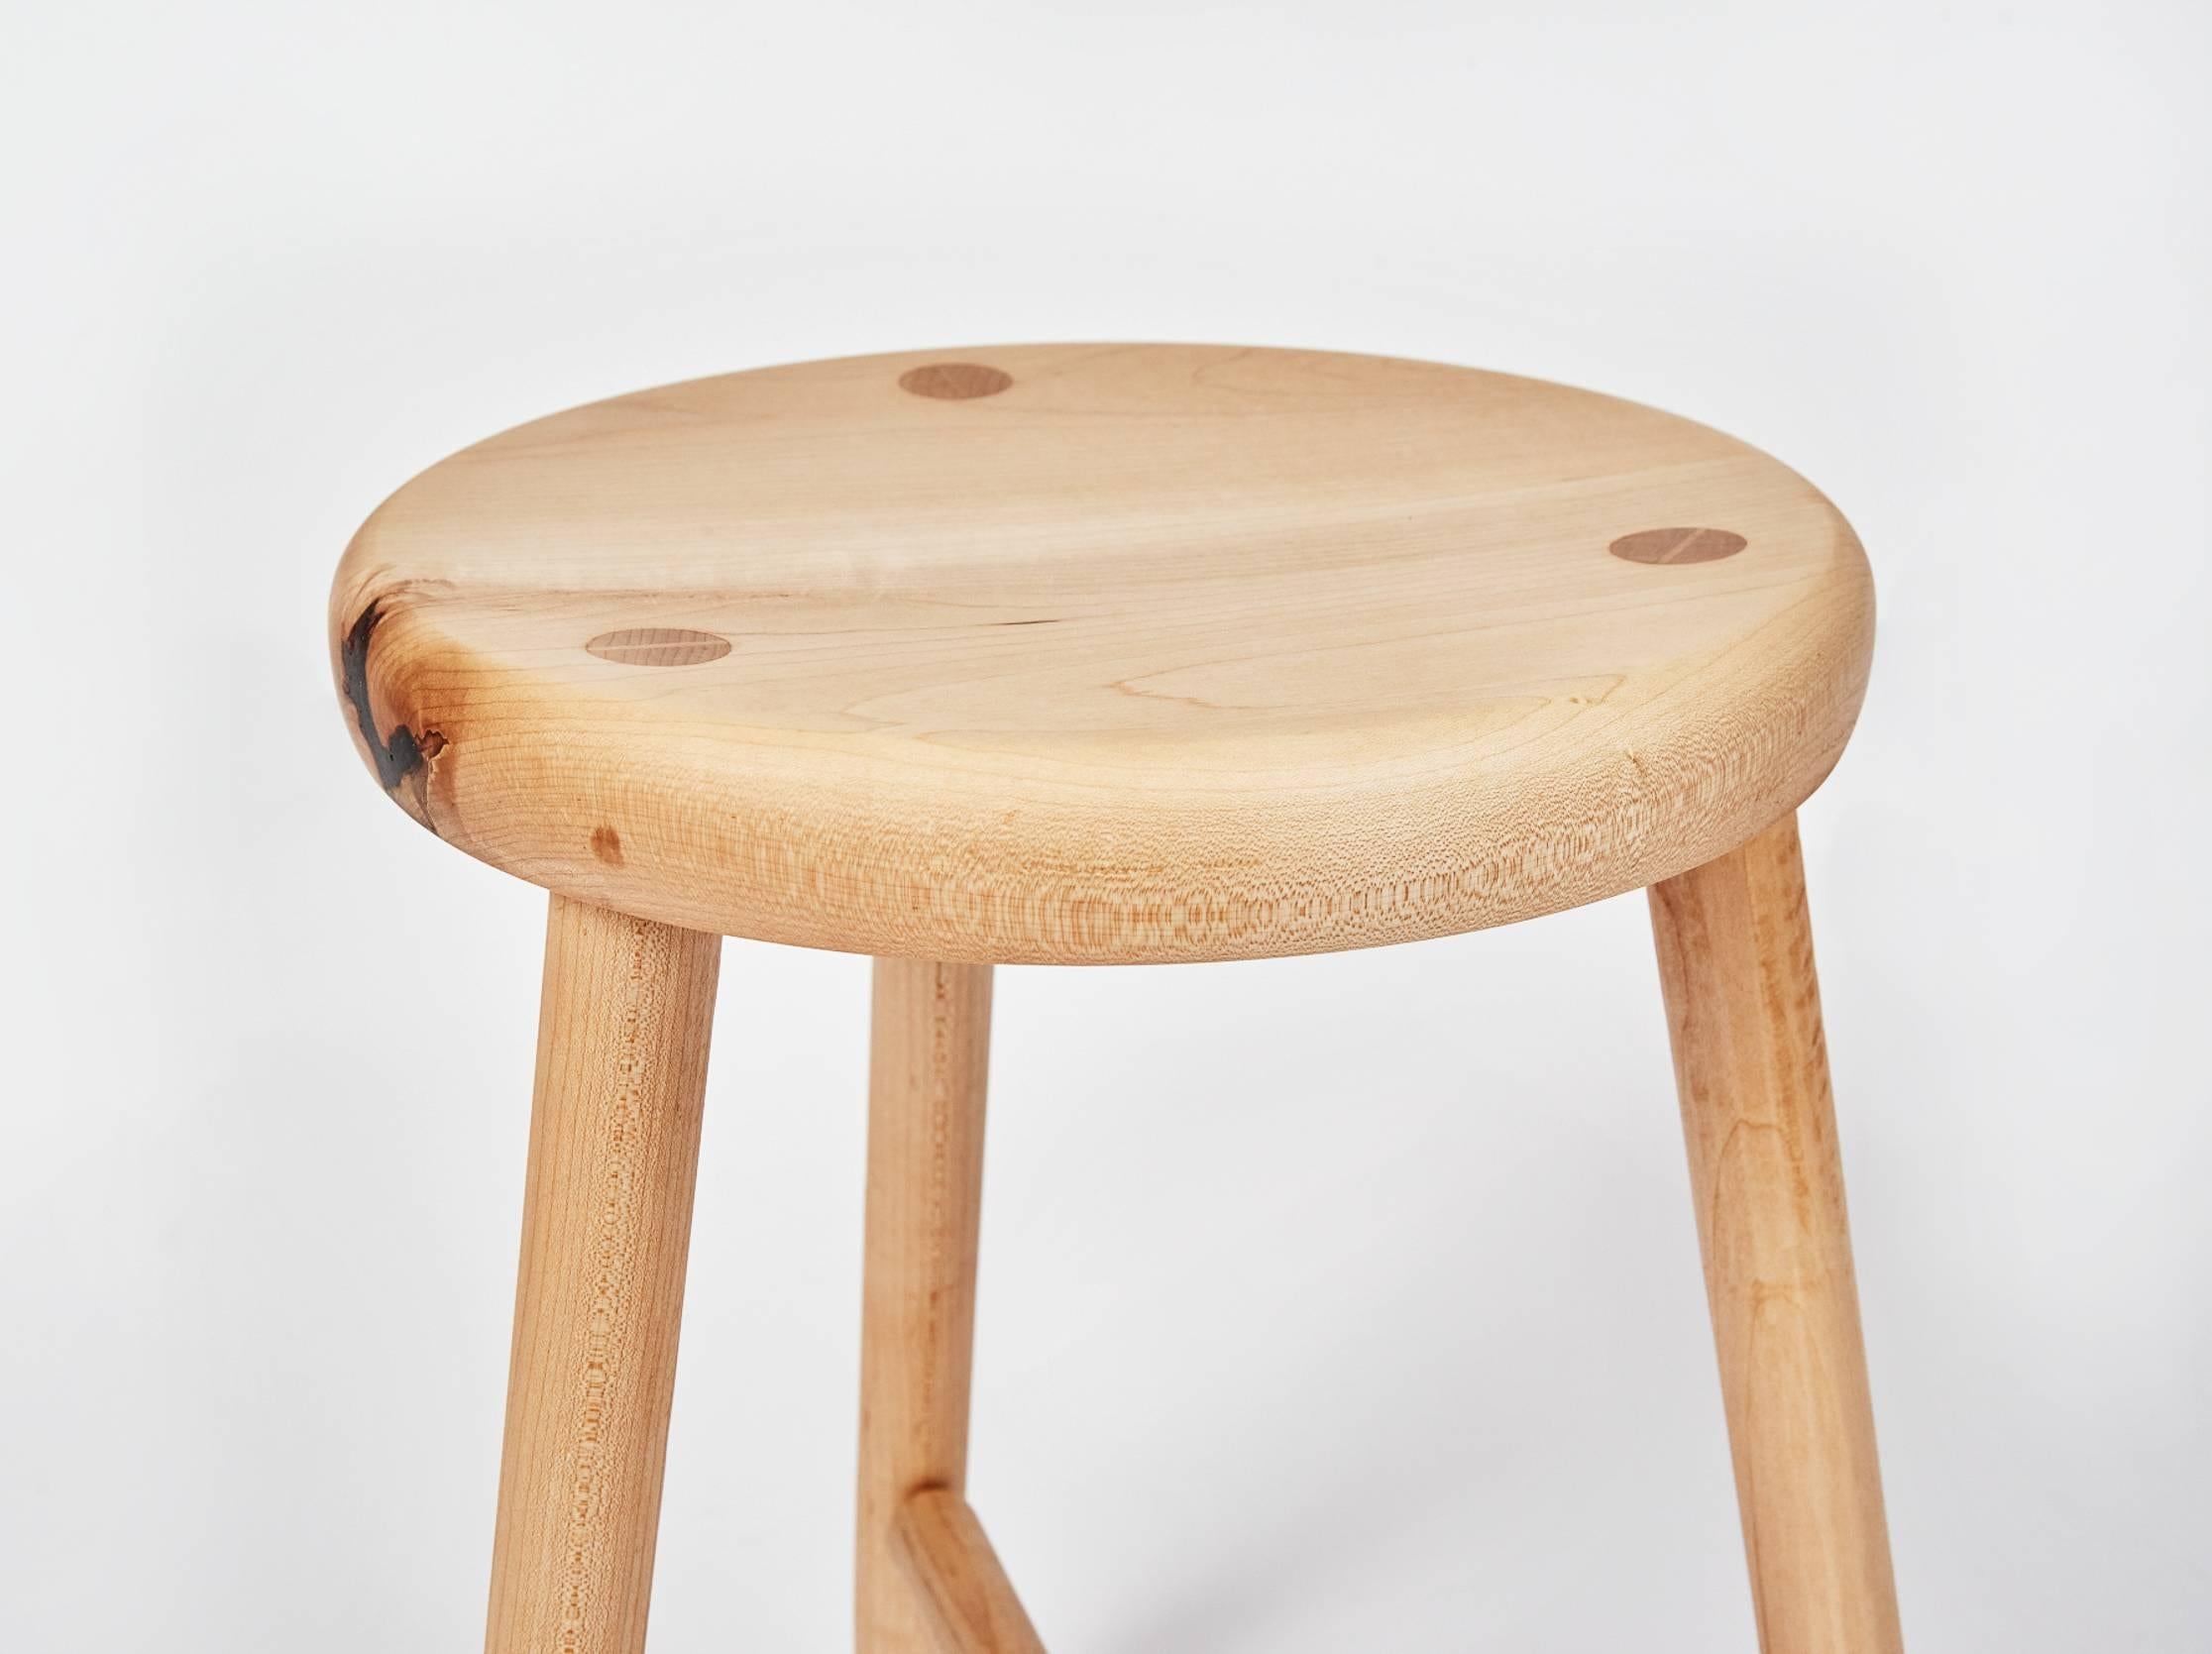 Contemporary Tripod Stool in Maple by Max Greenberg for Works Progress, 2016